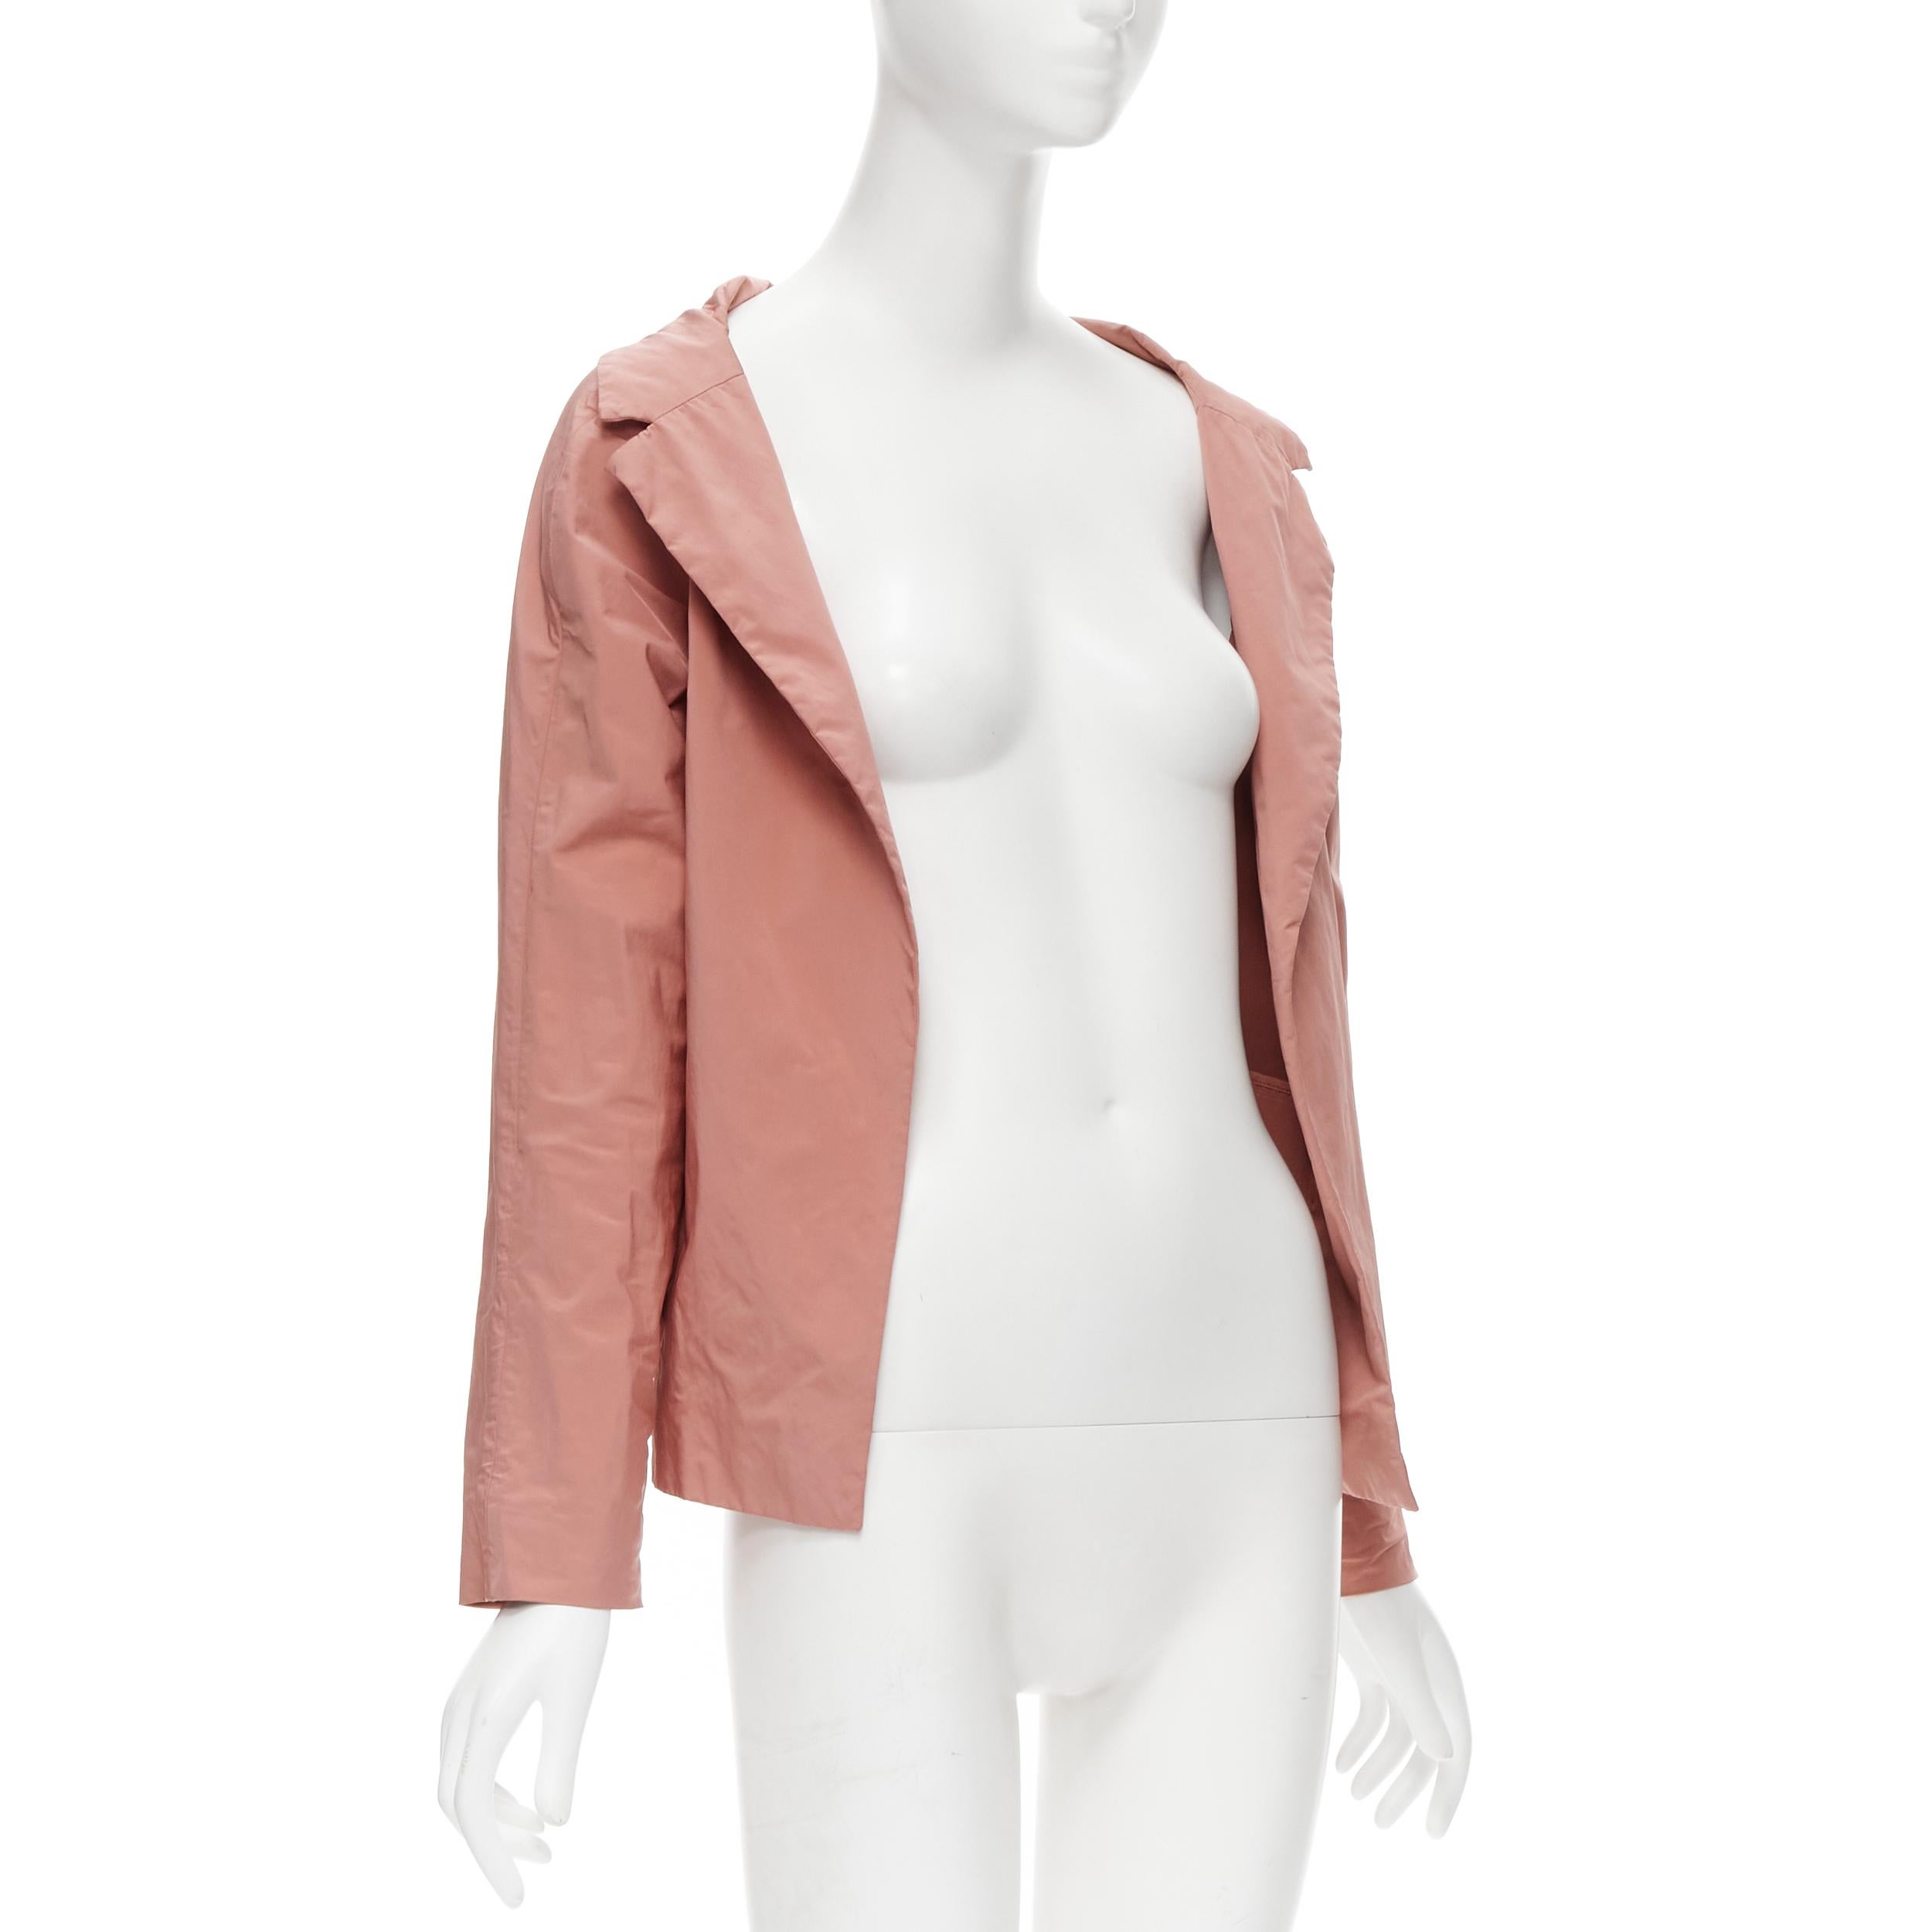 MARNI dusty blush pink polyamide nylon spread collar blazer jacket IT40 XS 
Reference: CELG/A00068 
Brand: Marni 
Material: Polyester 
Color: Pink 
Pattern: Solid 
Extra Detail: Open front. 
Made in: Italy 

CONDITION: 
Condition: Very good, this